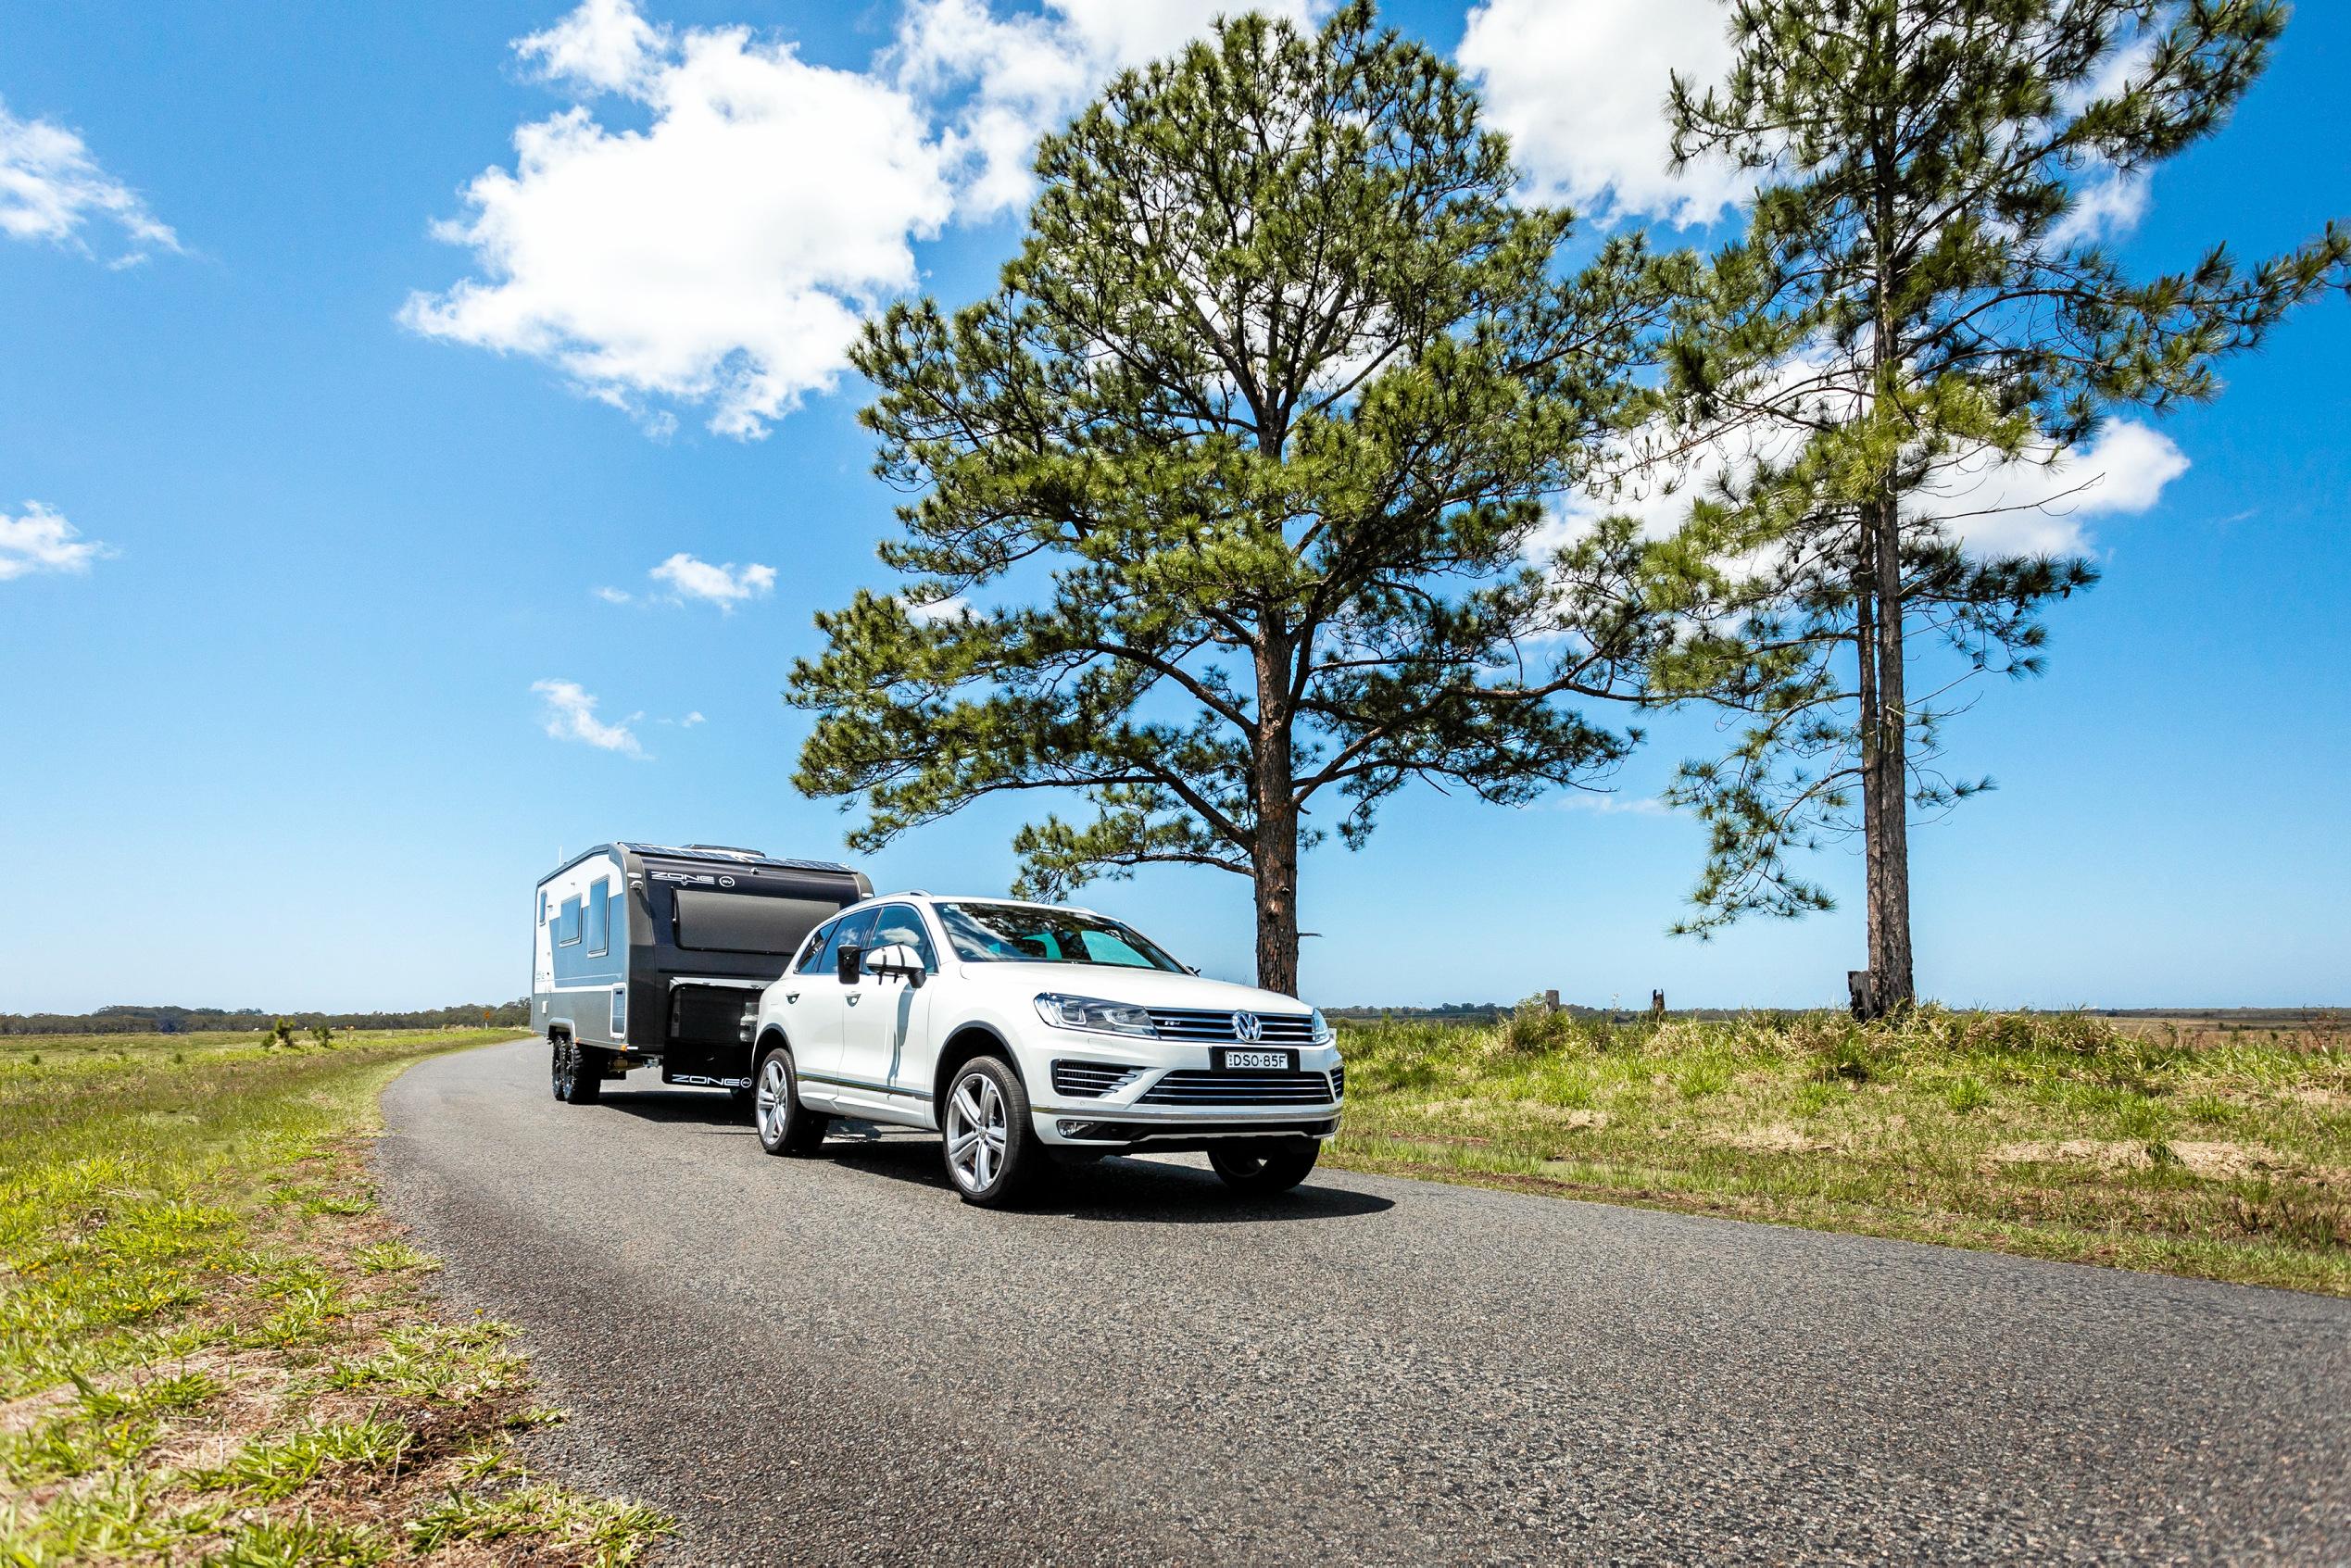 The Zone RV Summit Series range is made from carbon fibre, with prices starting from $173,000.